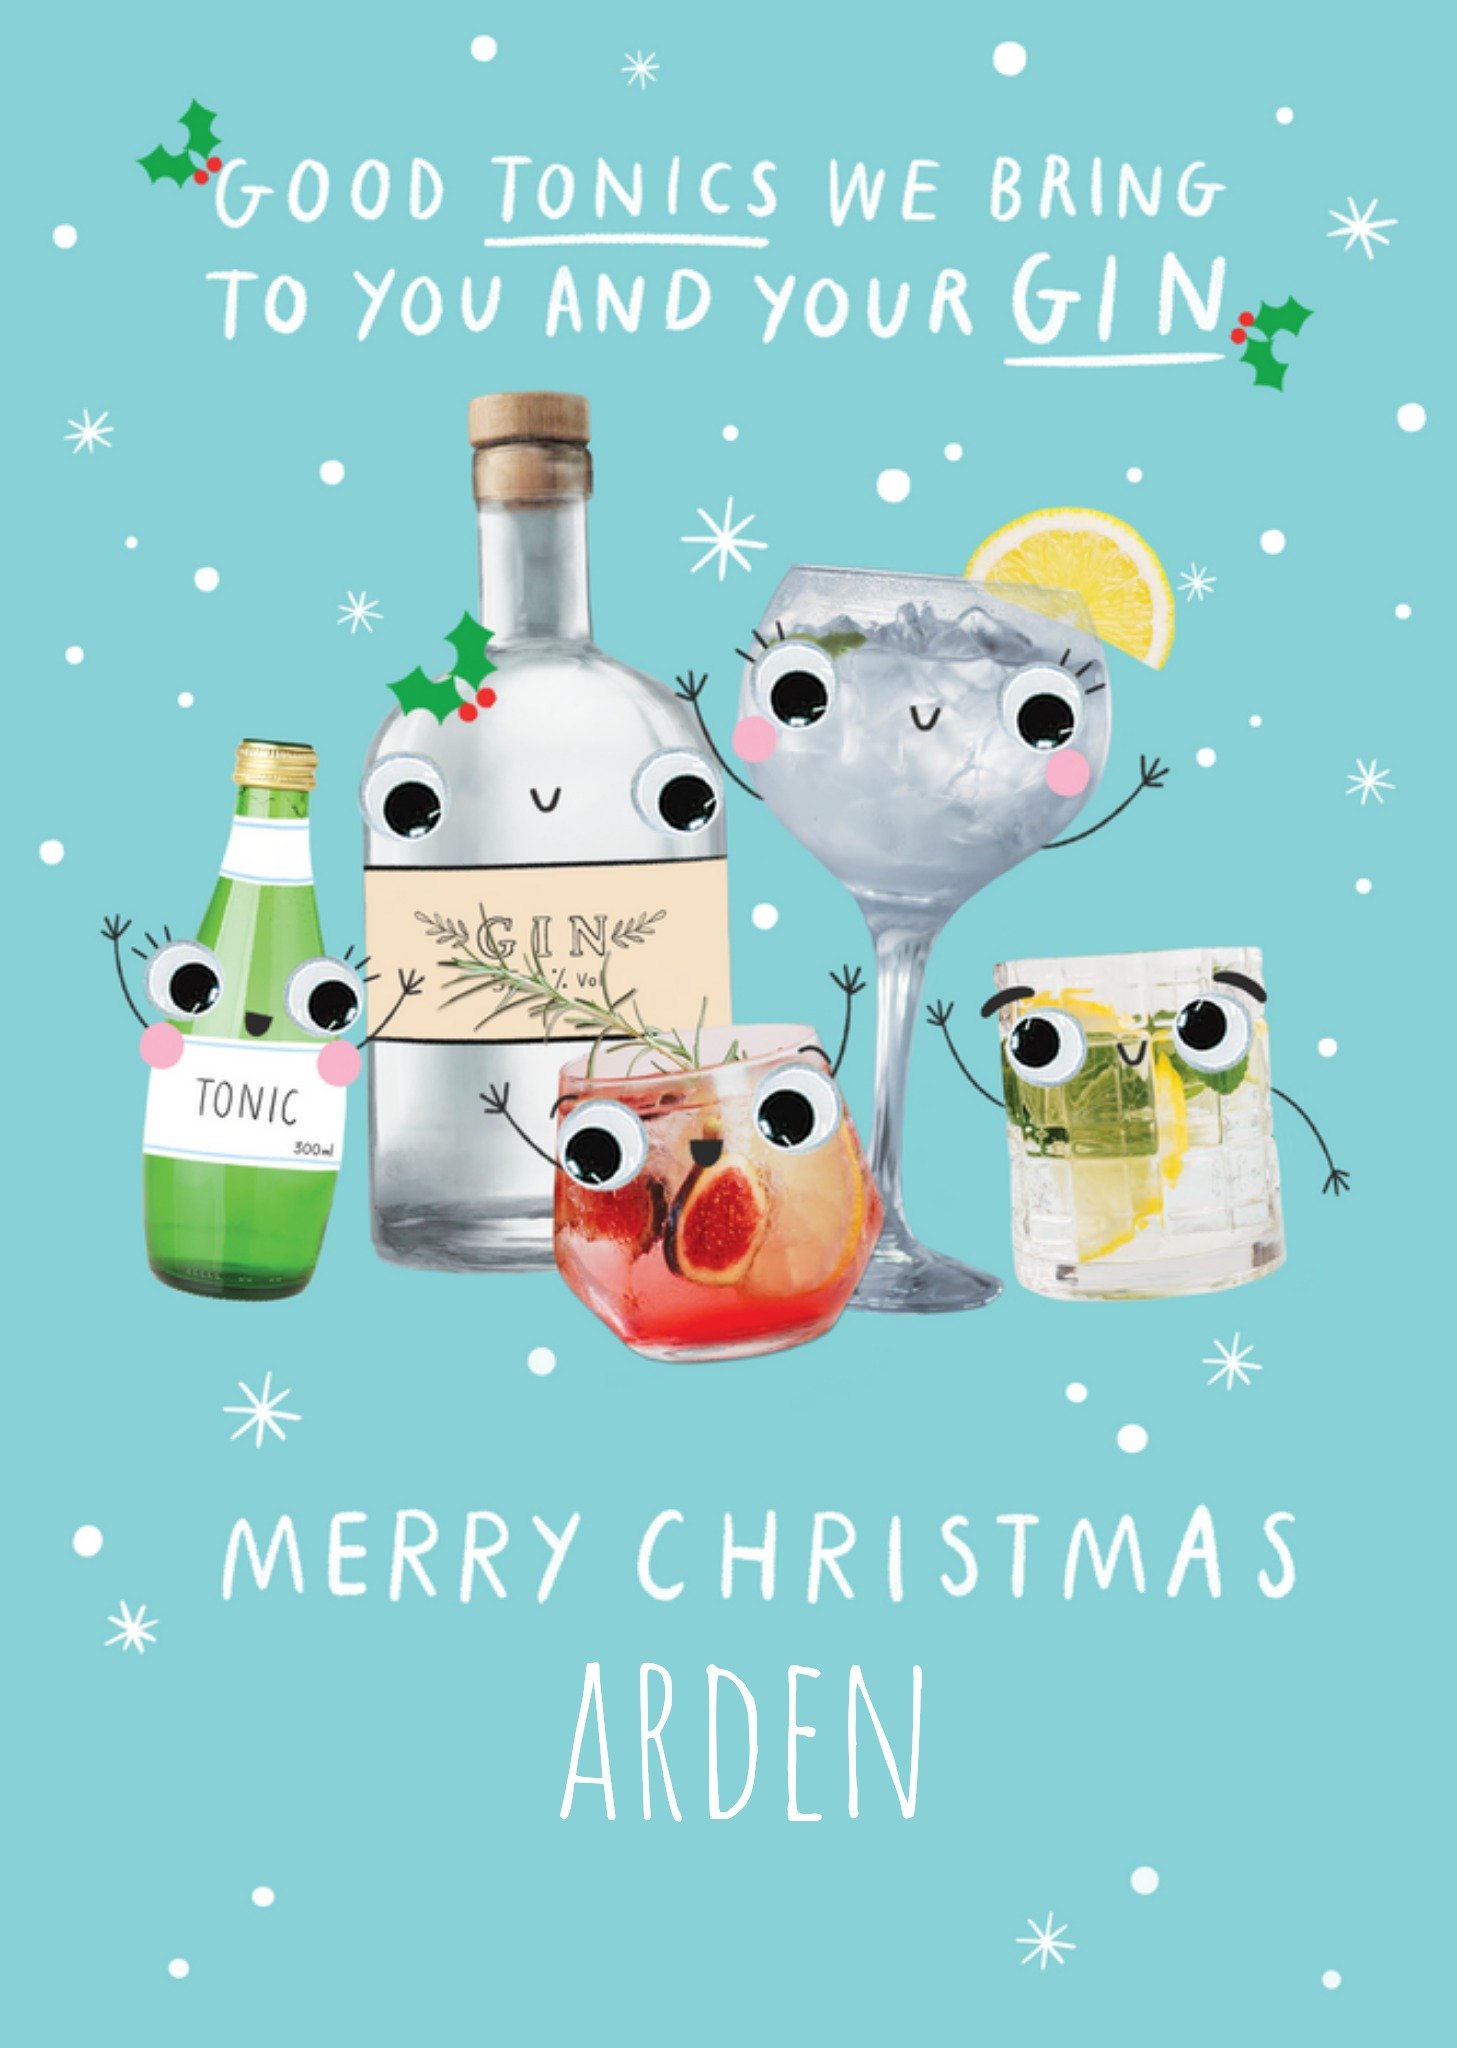 Moonpig Good Tonic We Bring To You And Your Gin Christmas Card Ecard